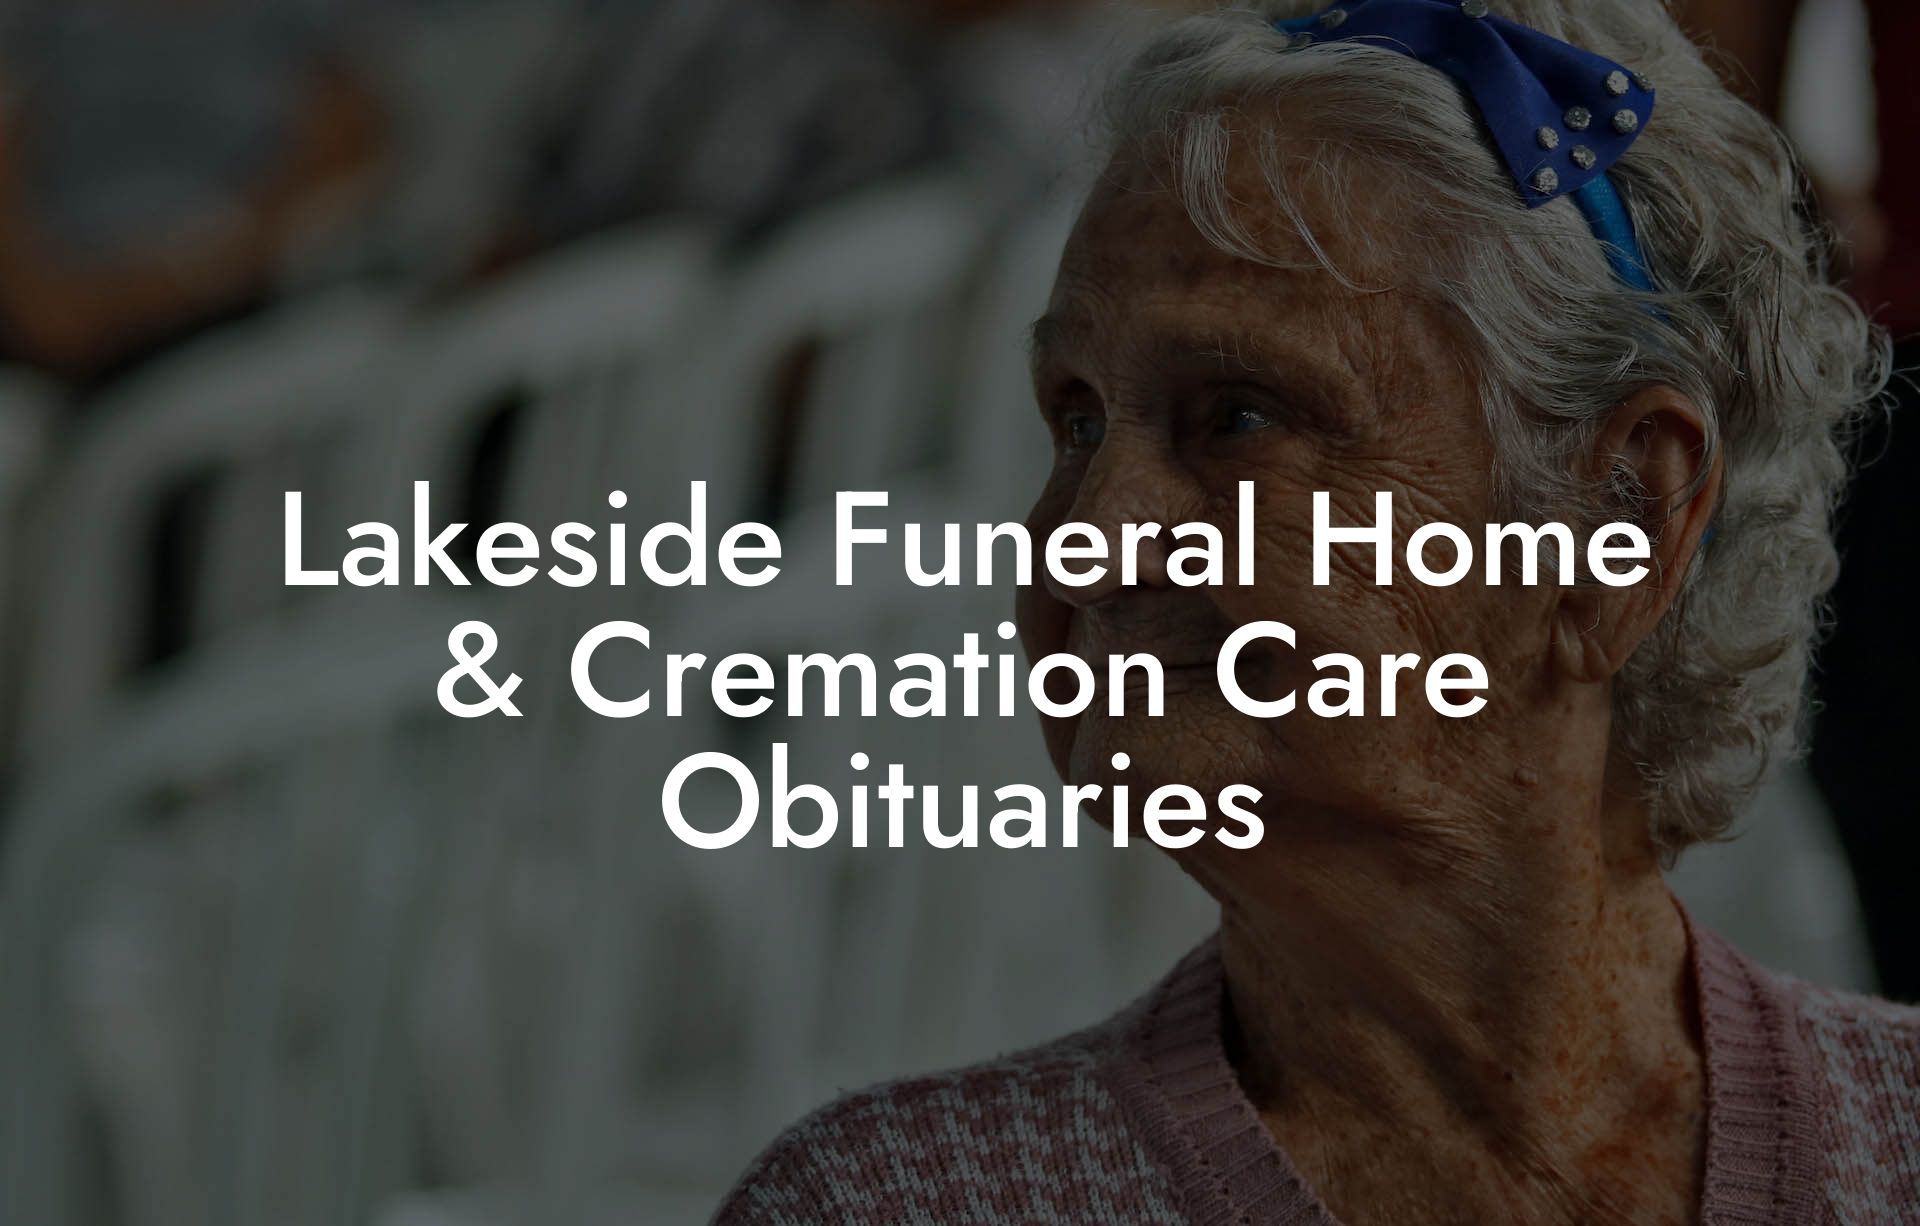 Lakeside Funeral Home & Cremation Care Obituaries